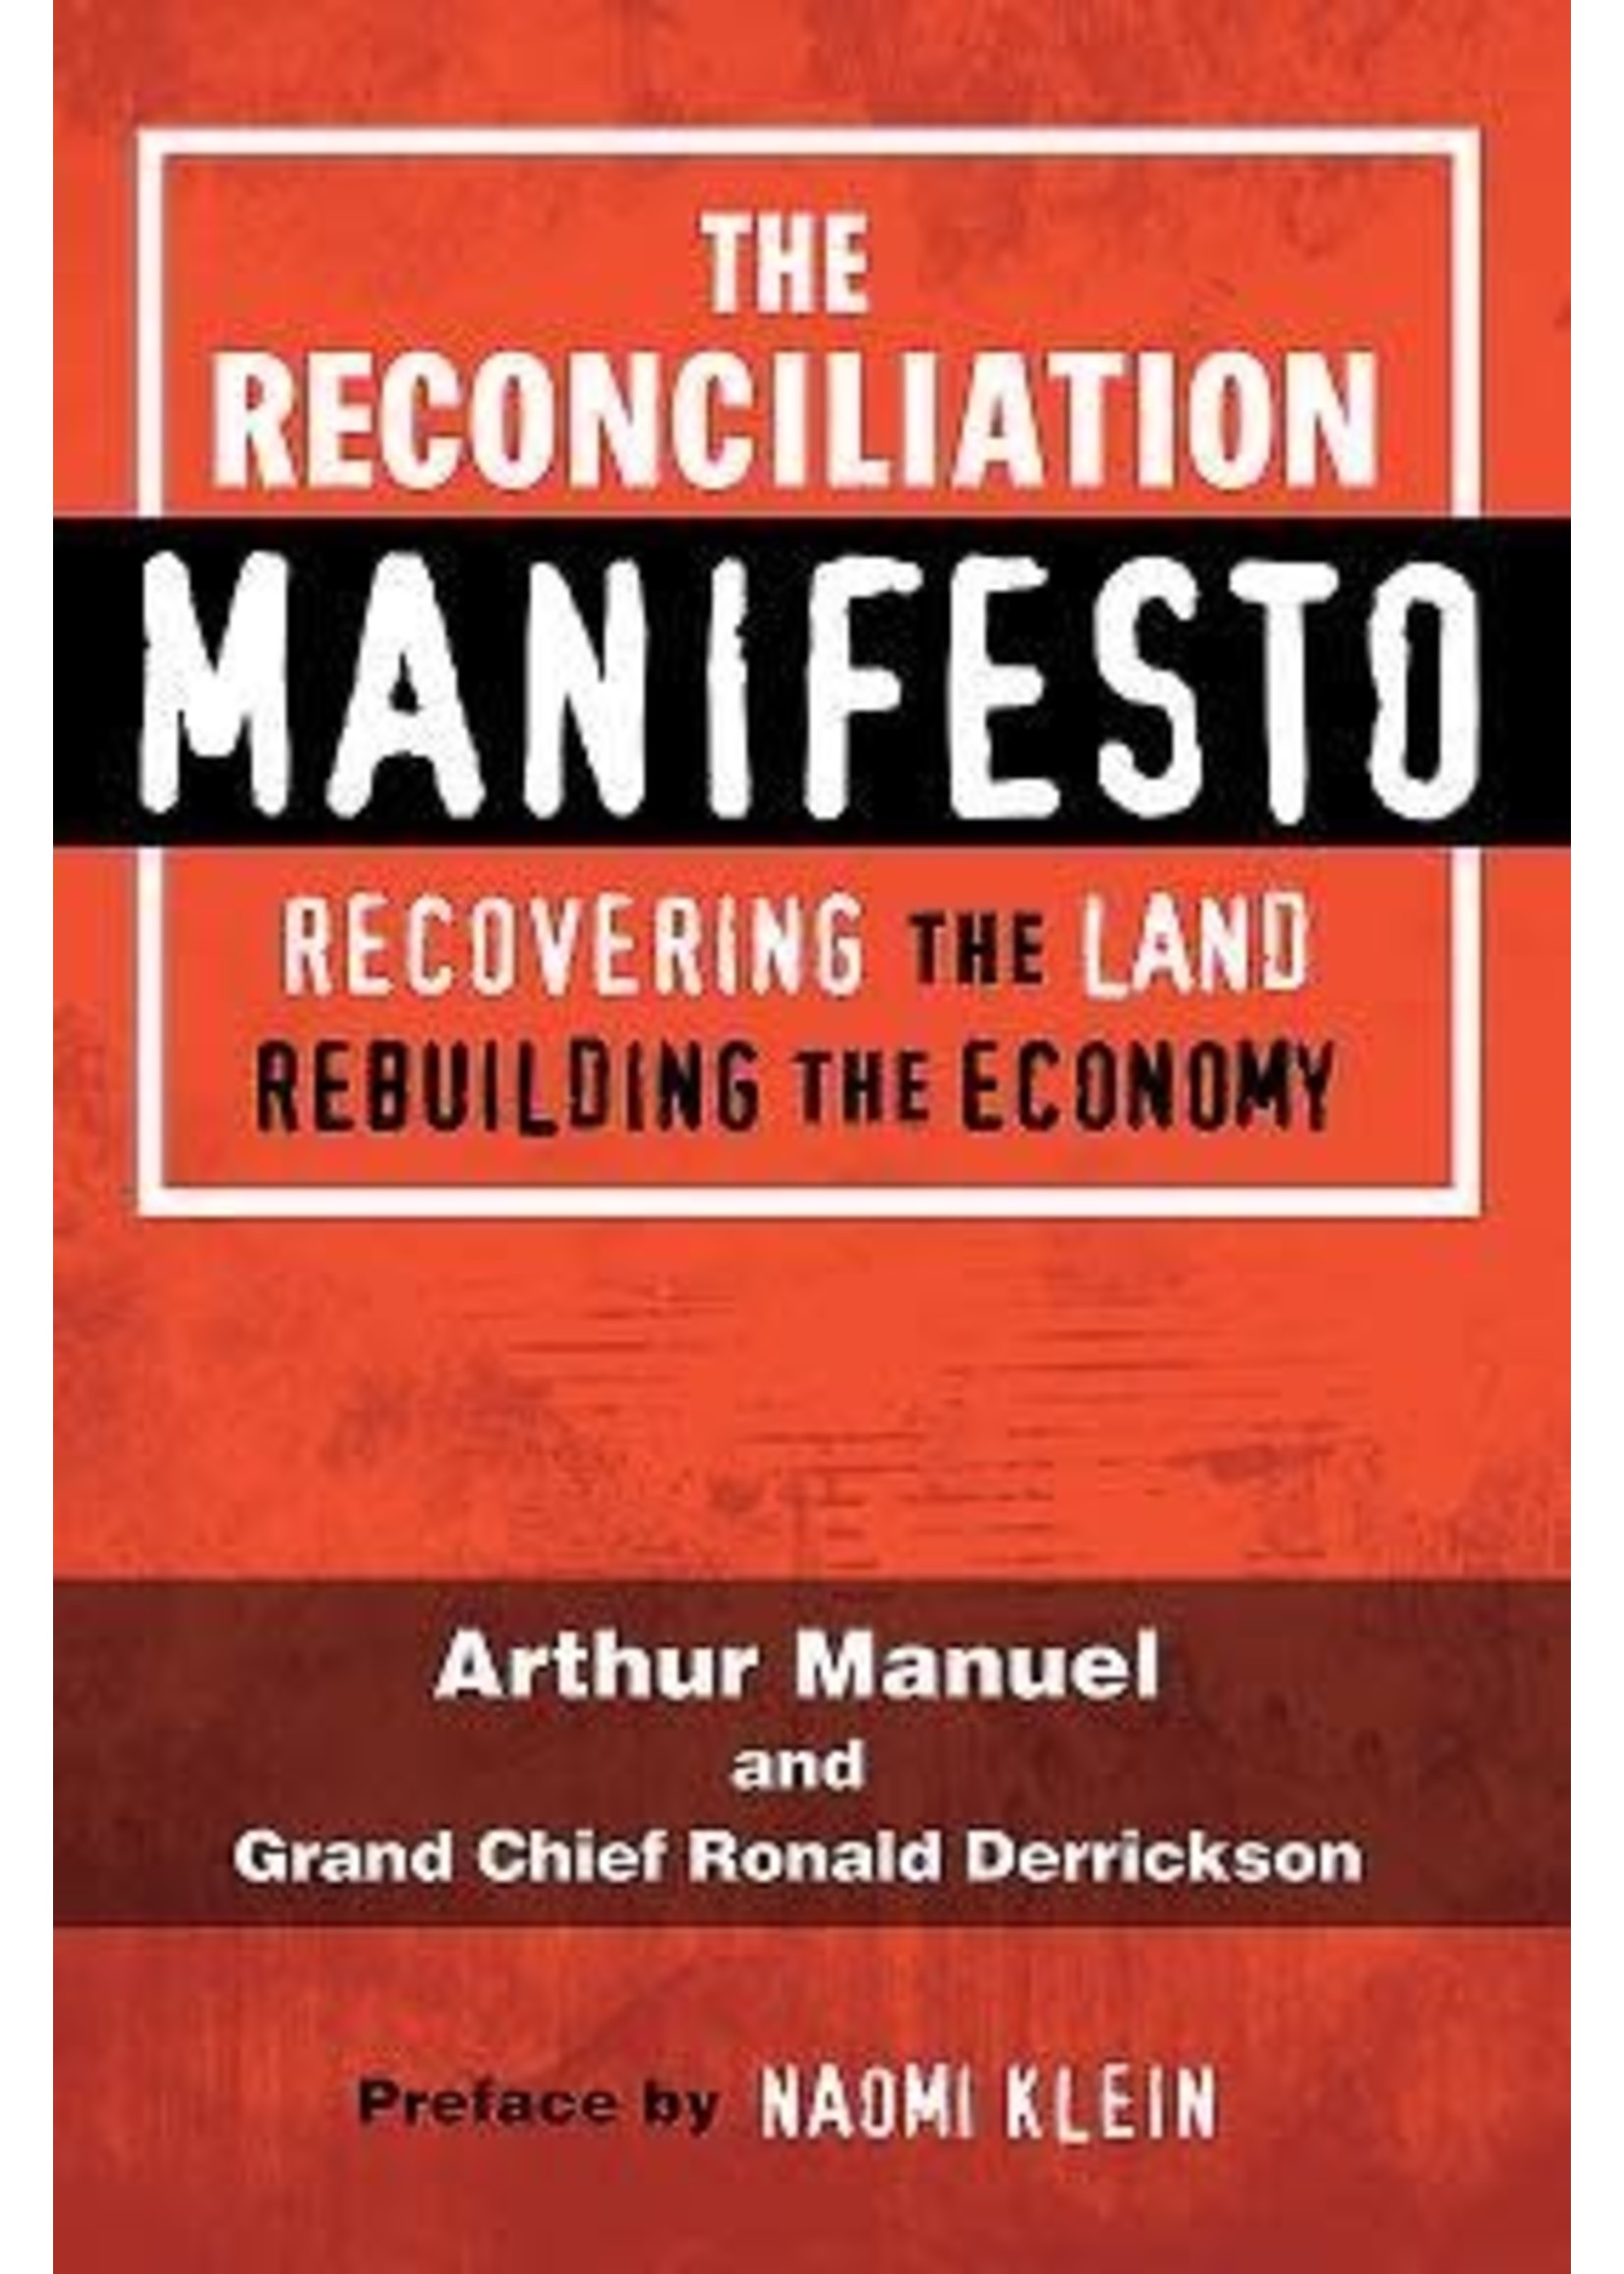 The Reconciliation Manifesto: Recovering the Land, Rebuilding the Economy by Arthur Manuel, Ronald M. Derrickson